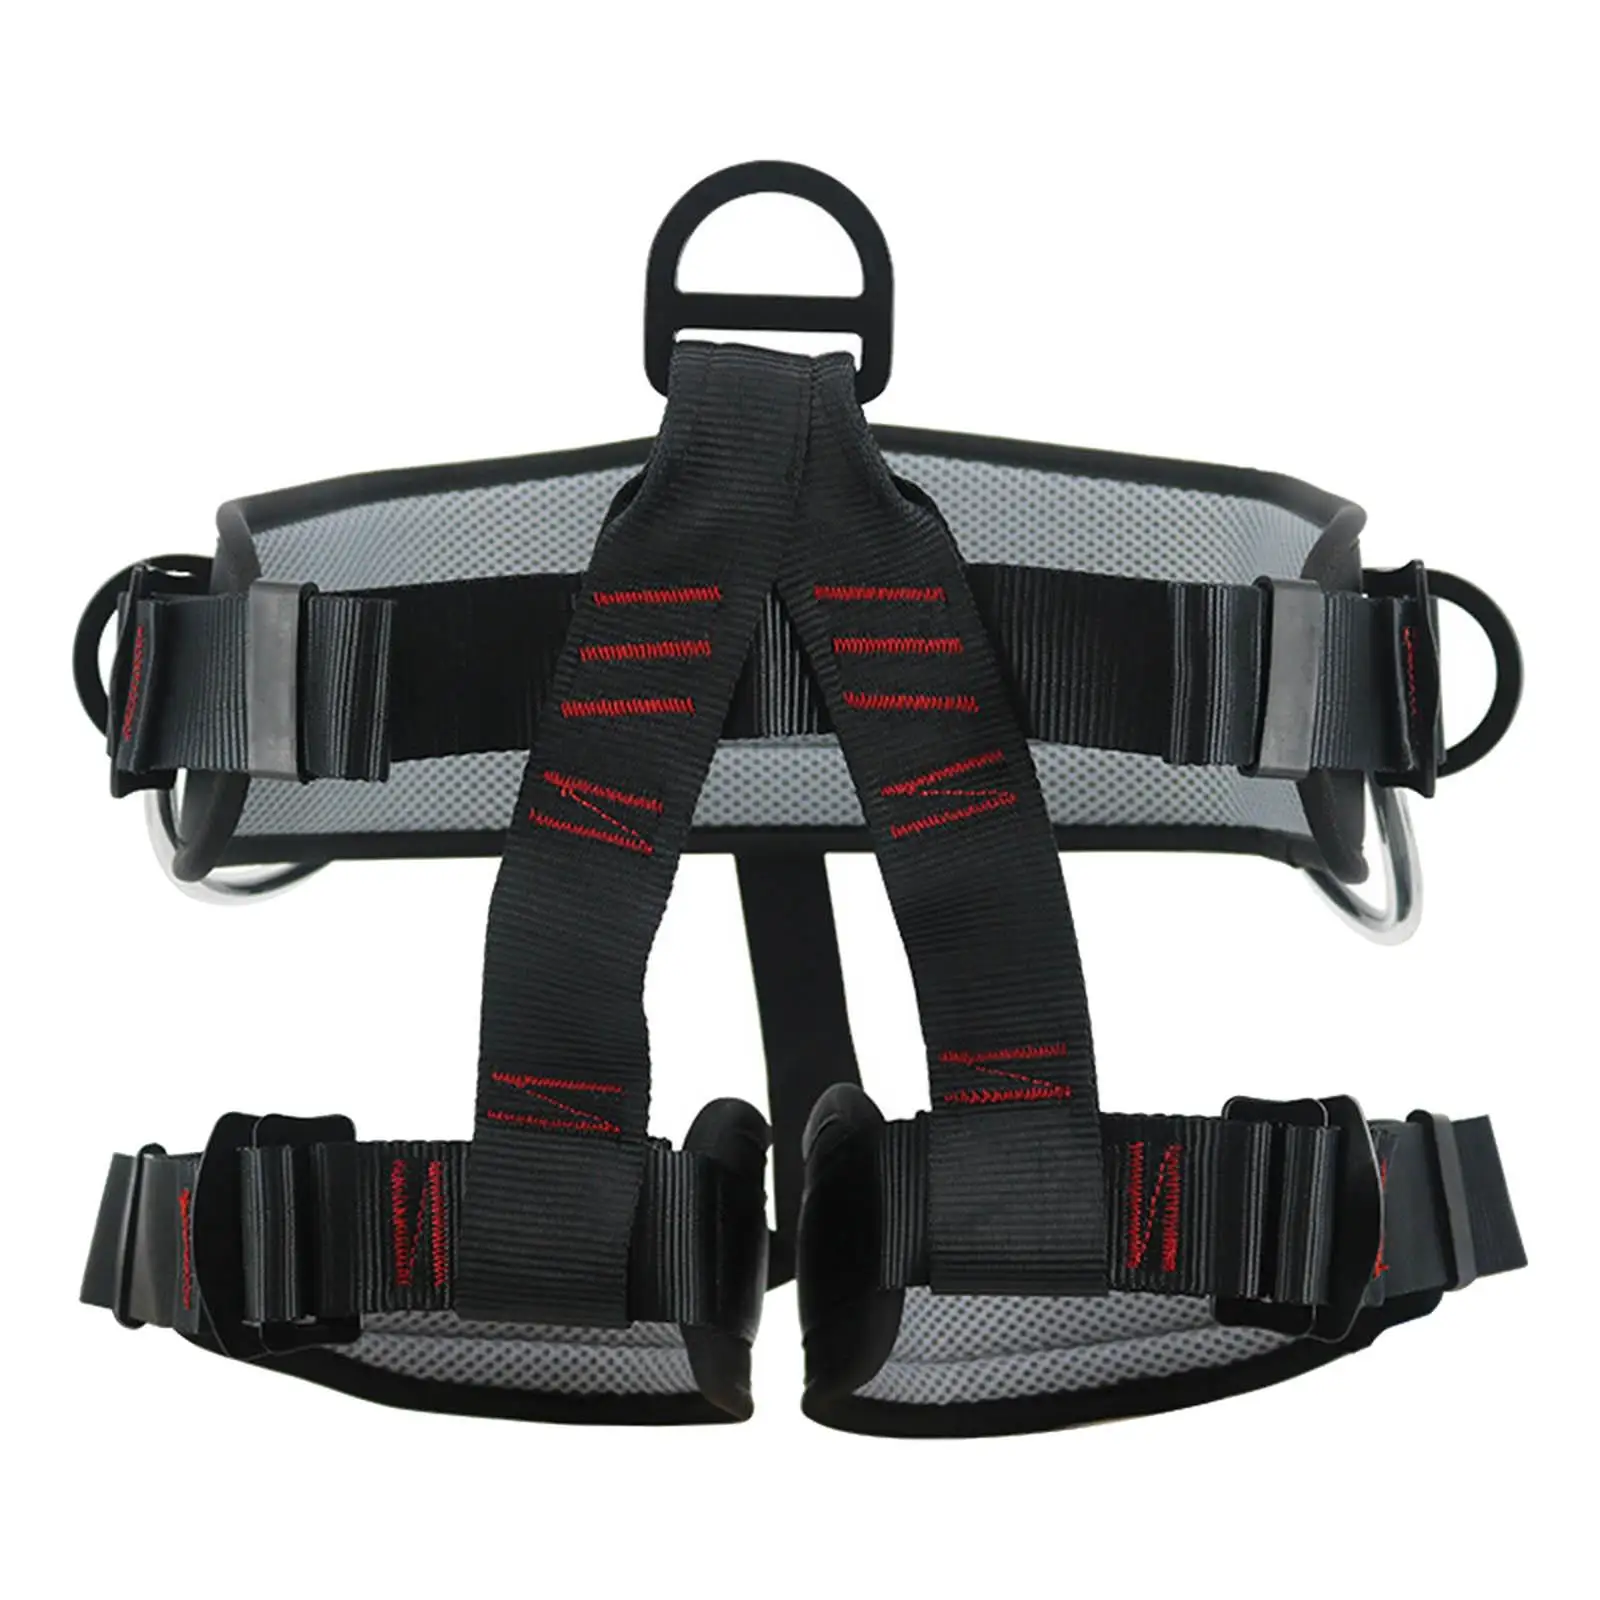 Tree Rock Climbing Harness Strap Falling Protection Heavy Duty 25kN Harness for Survival Equipment Protective Supplies Outdoor